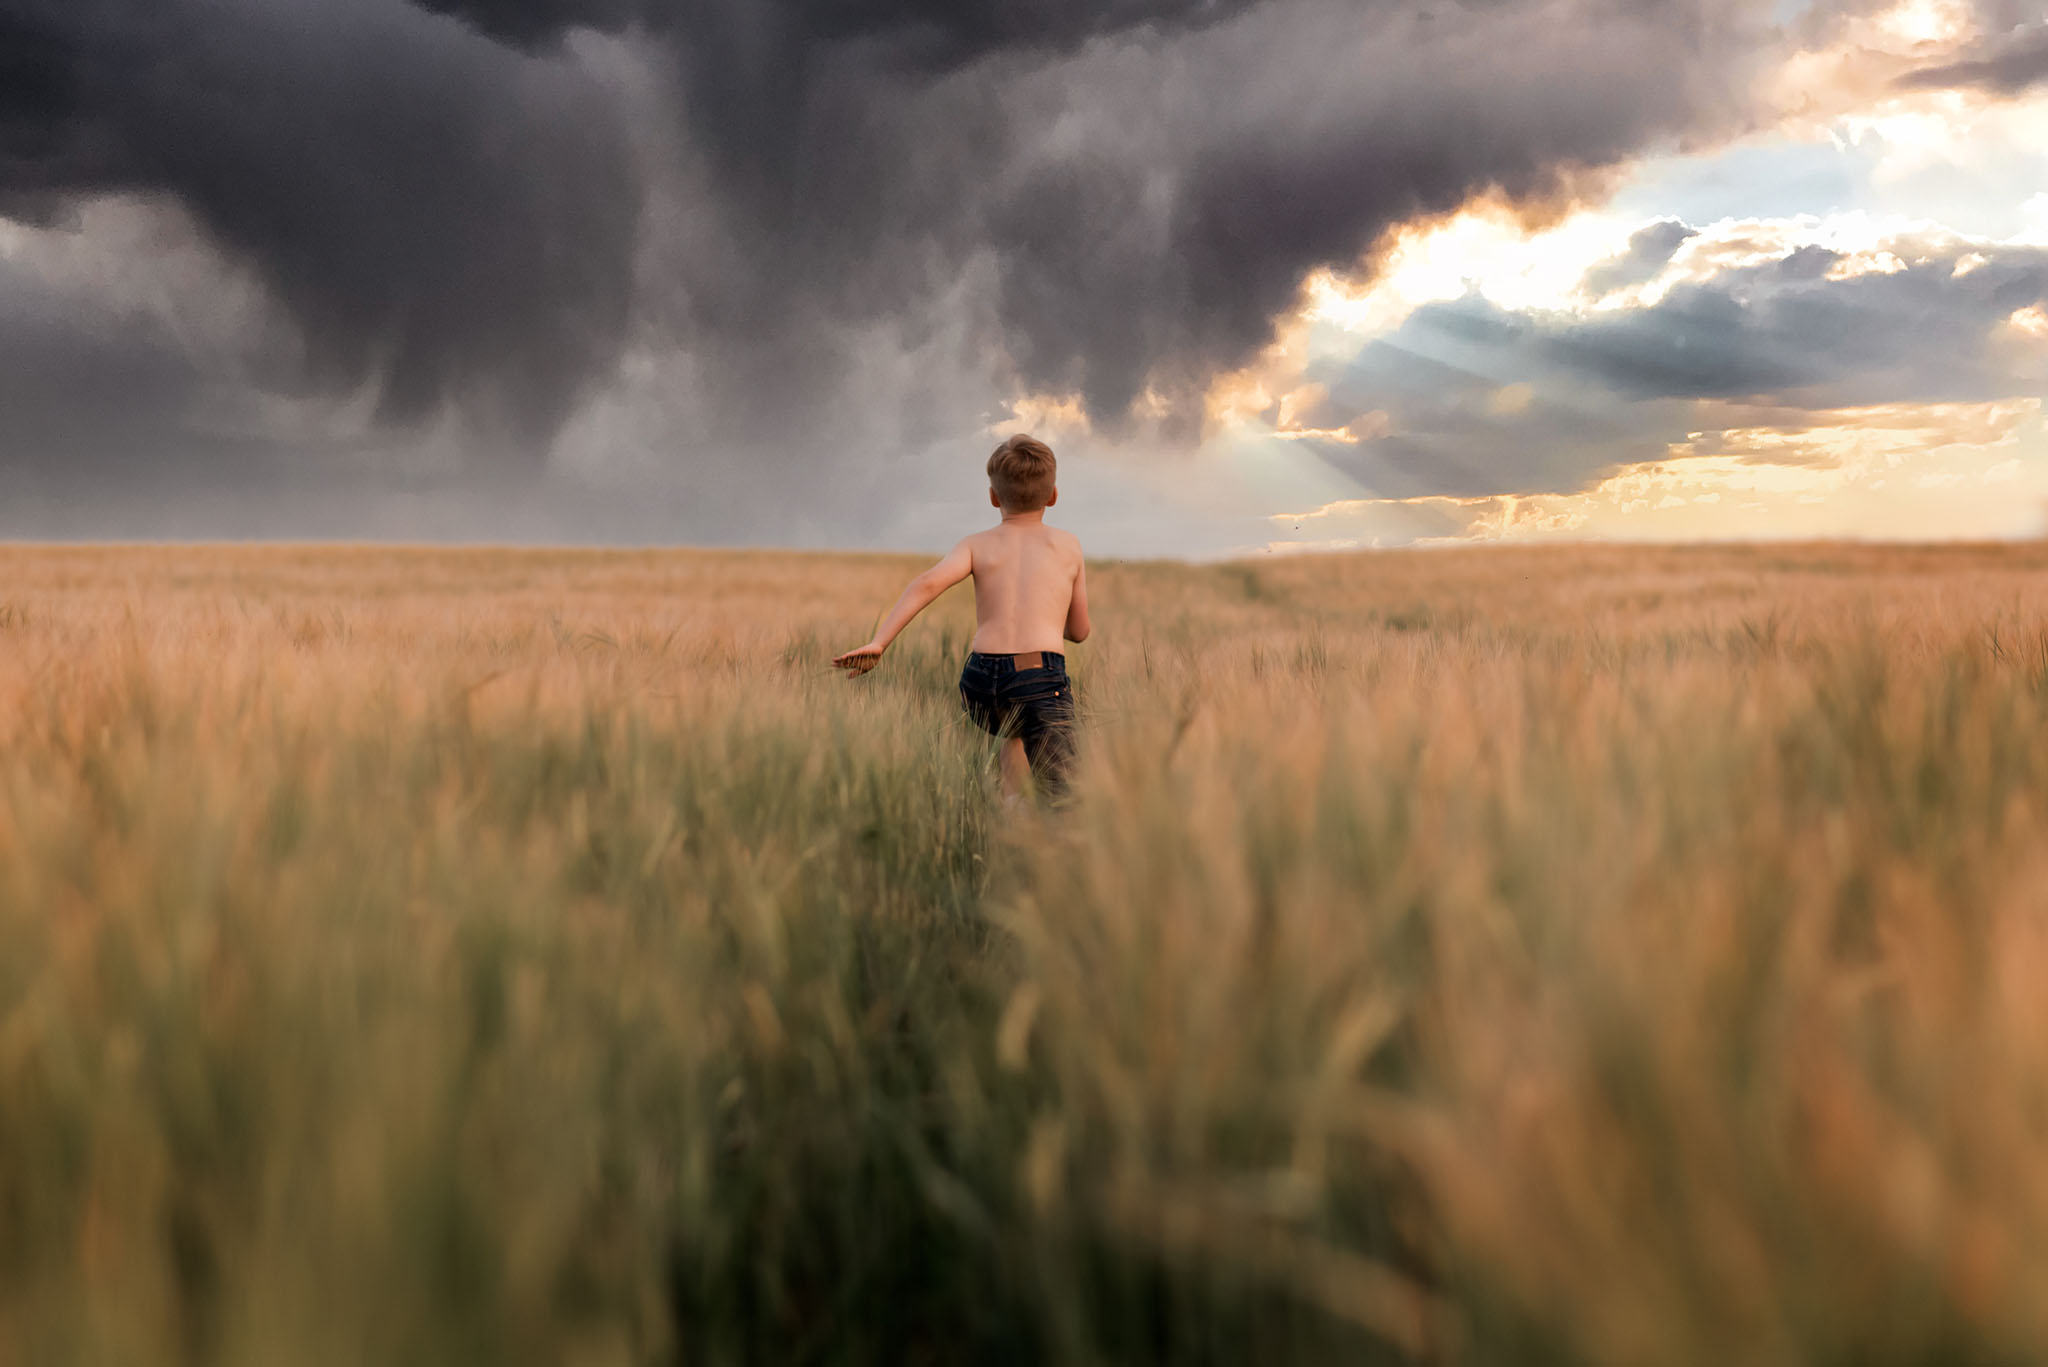 Child running through a field with stormy sky